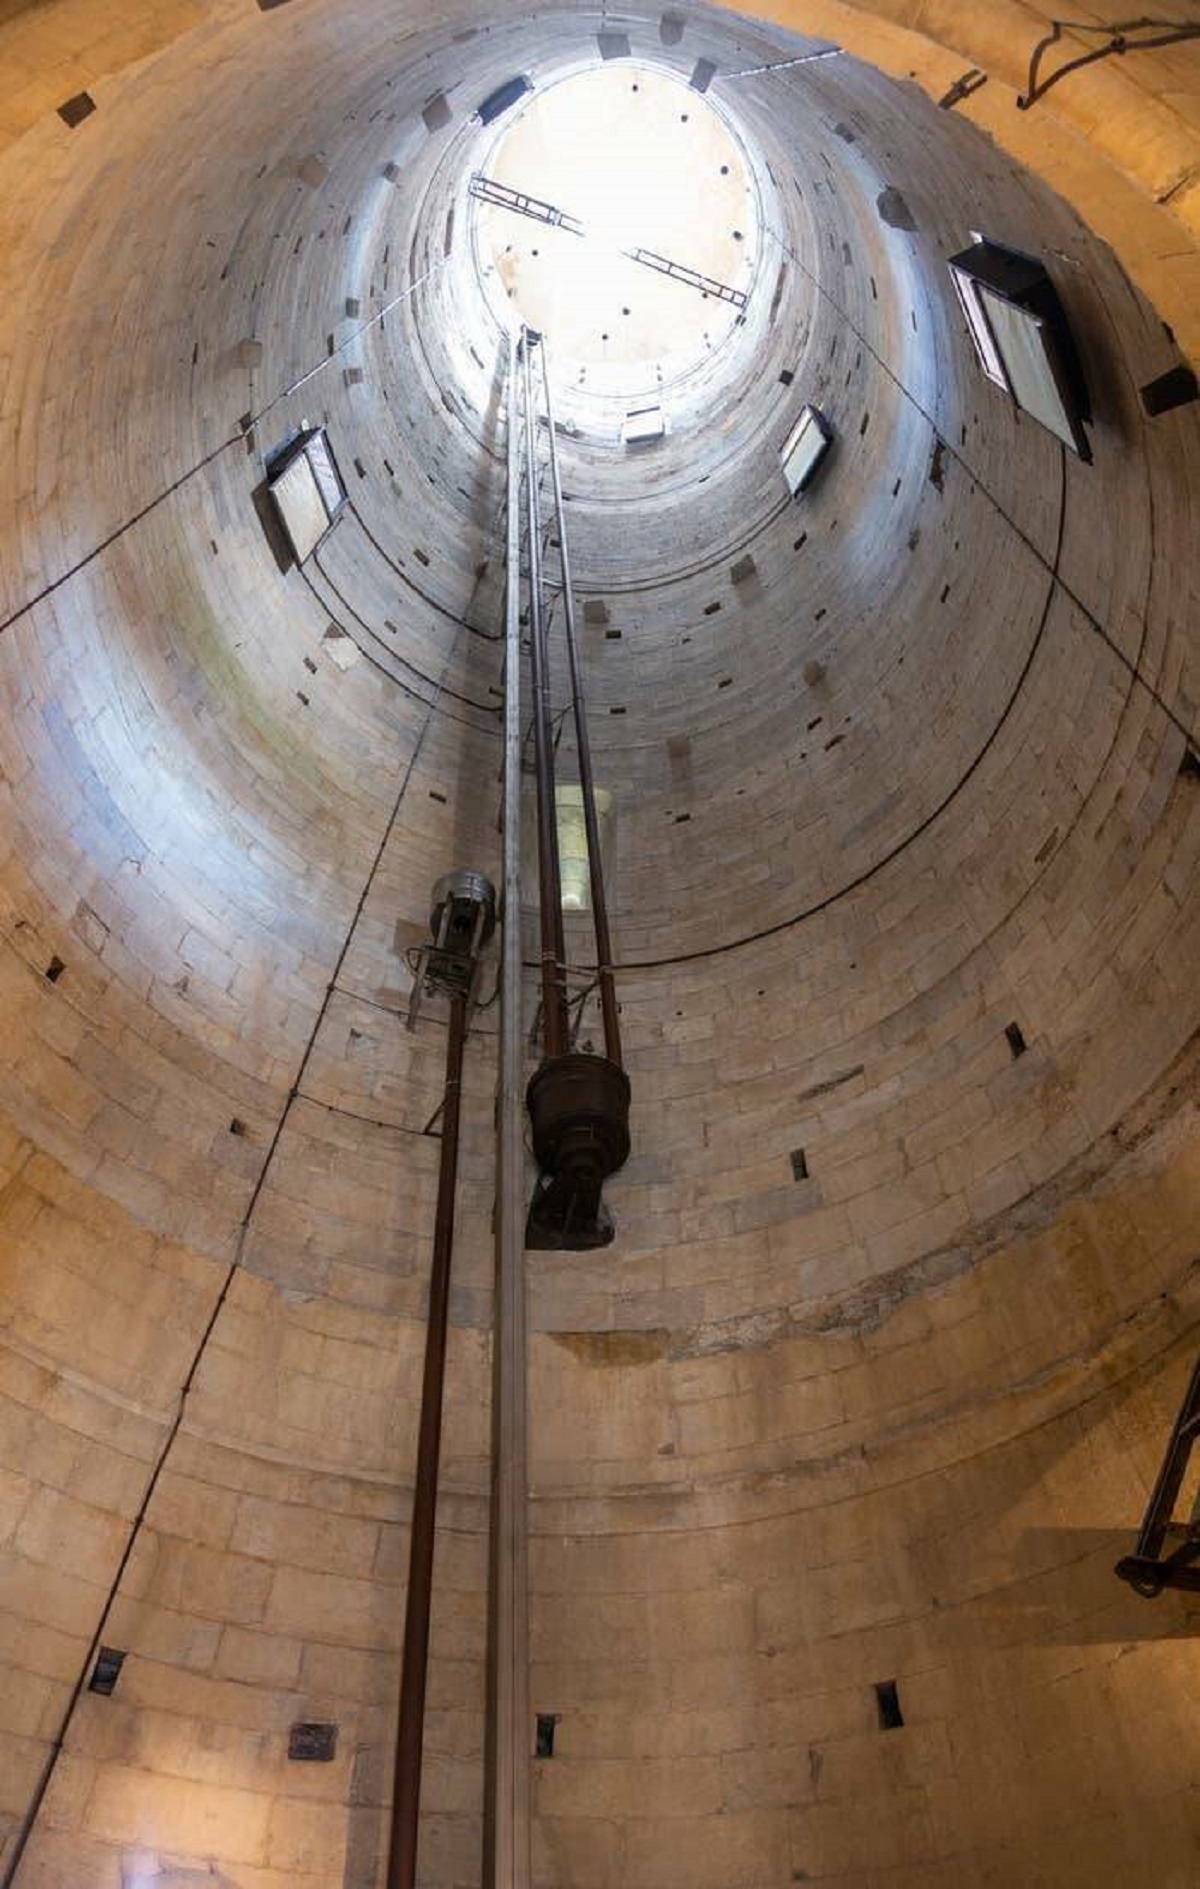 The inside of the Leaning Tower of Pisa is...underwhelming: